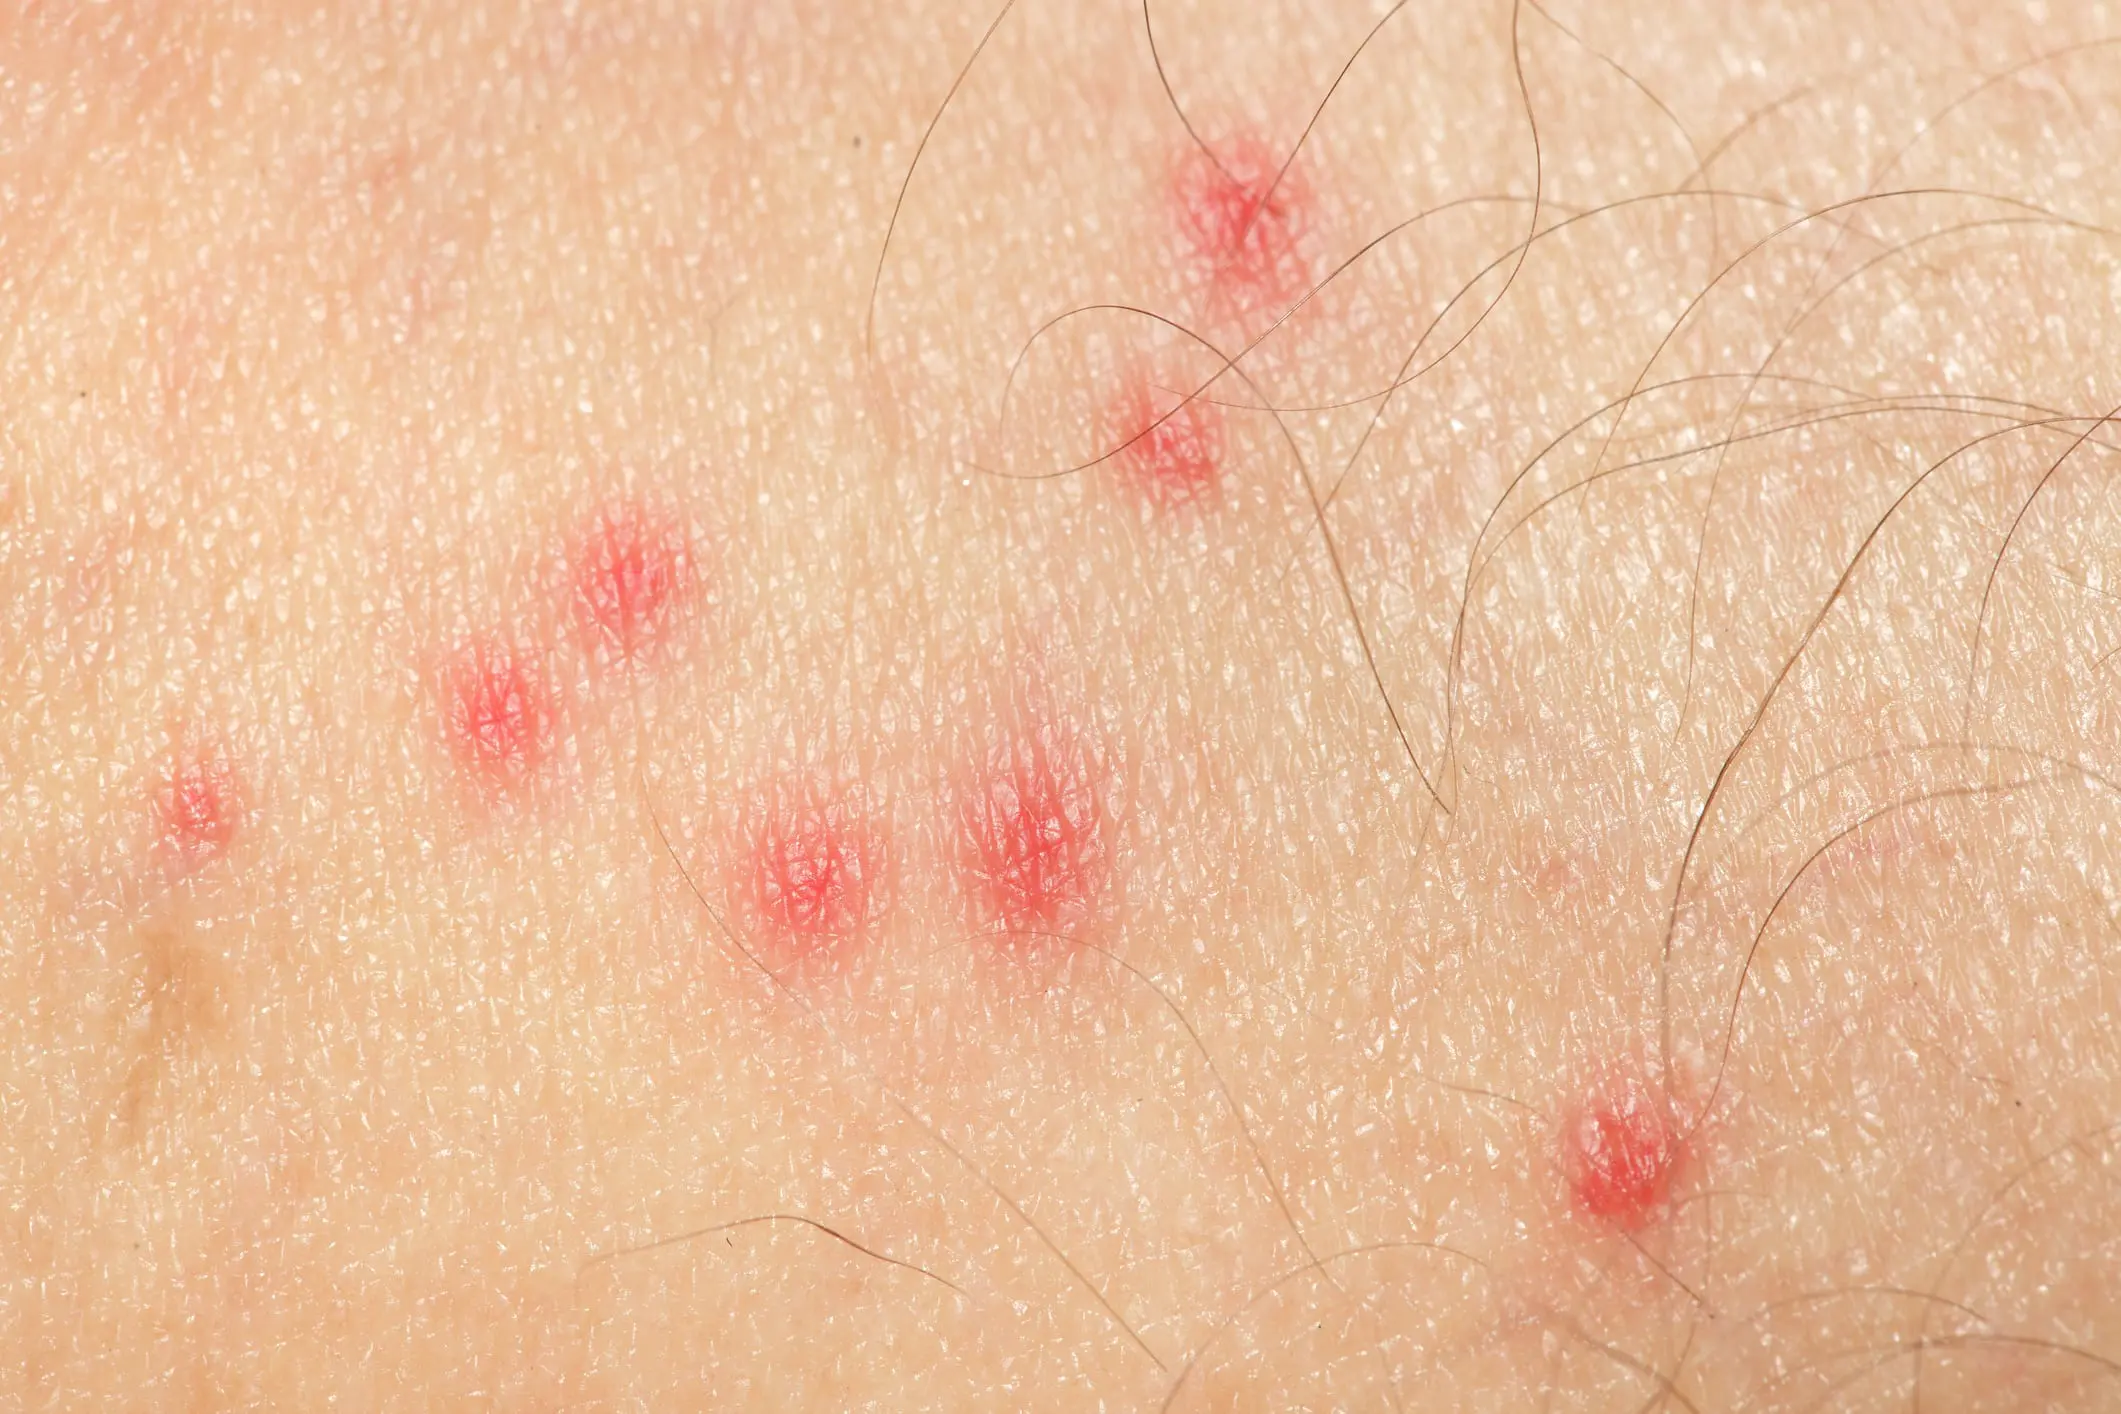 Bug Bites, Midwest Express Clinic